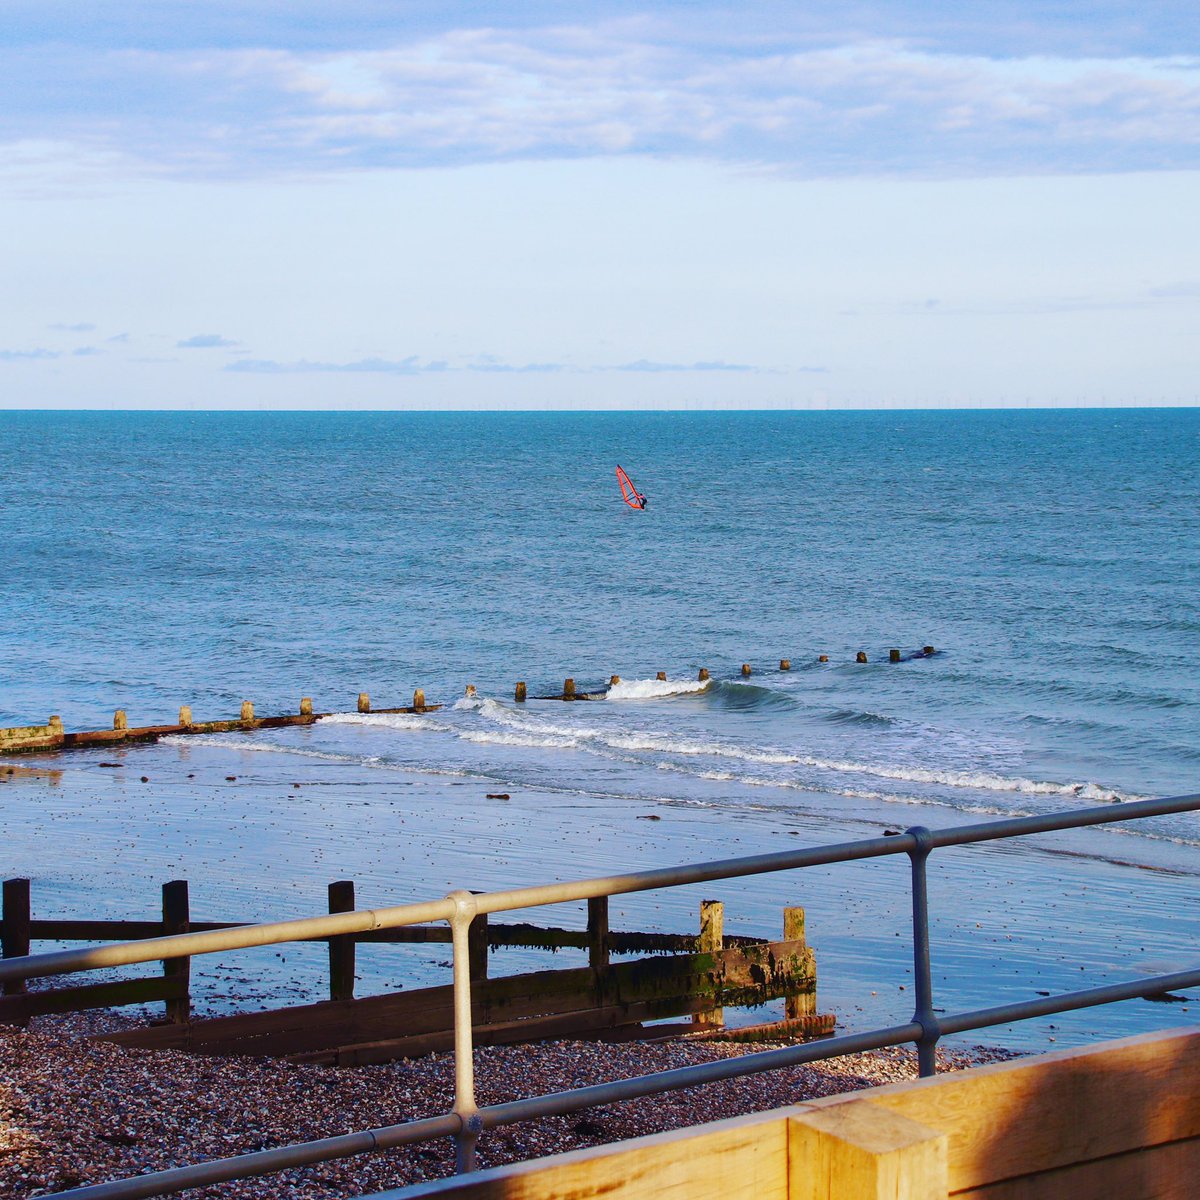 What a view from @PeterdeSavary’s NEW Beach Hut Suites on the #southcoast! Book your stay now by calling 01243 827142! #weekendbreak #staycation #ukbreaks @LondoTaxi @VisitSouthDowns @WeAcceptPets @tourismseast @sussexbythesea1 @VSussex @iFootpath_Accom @StayPlaces